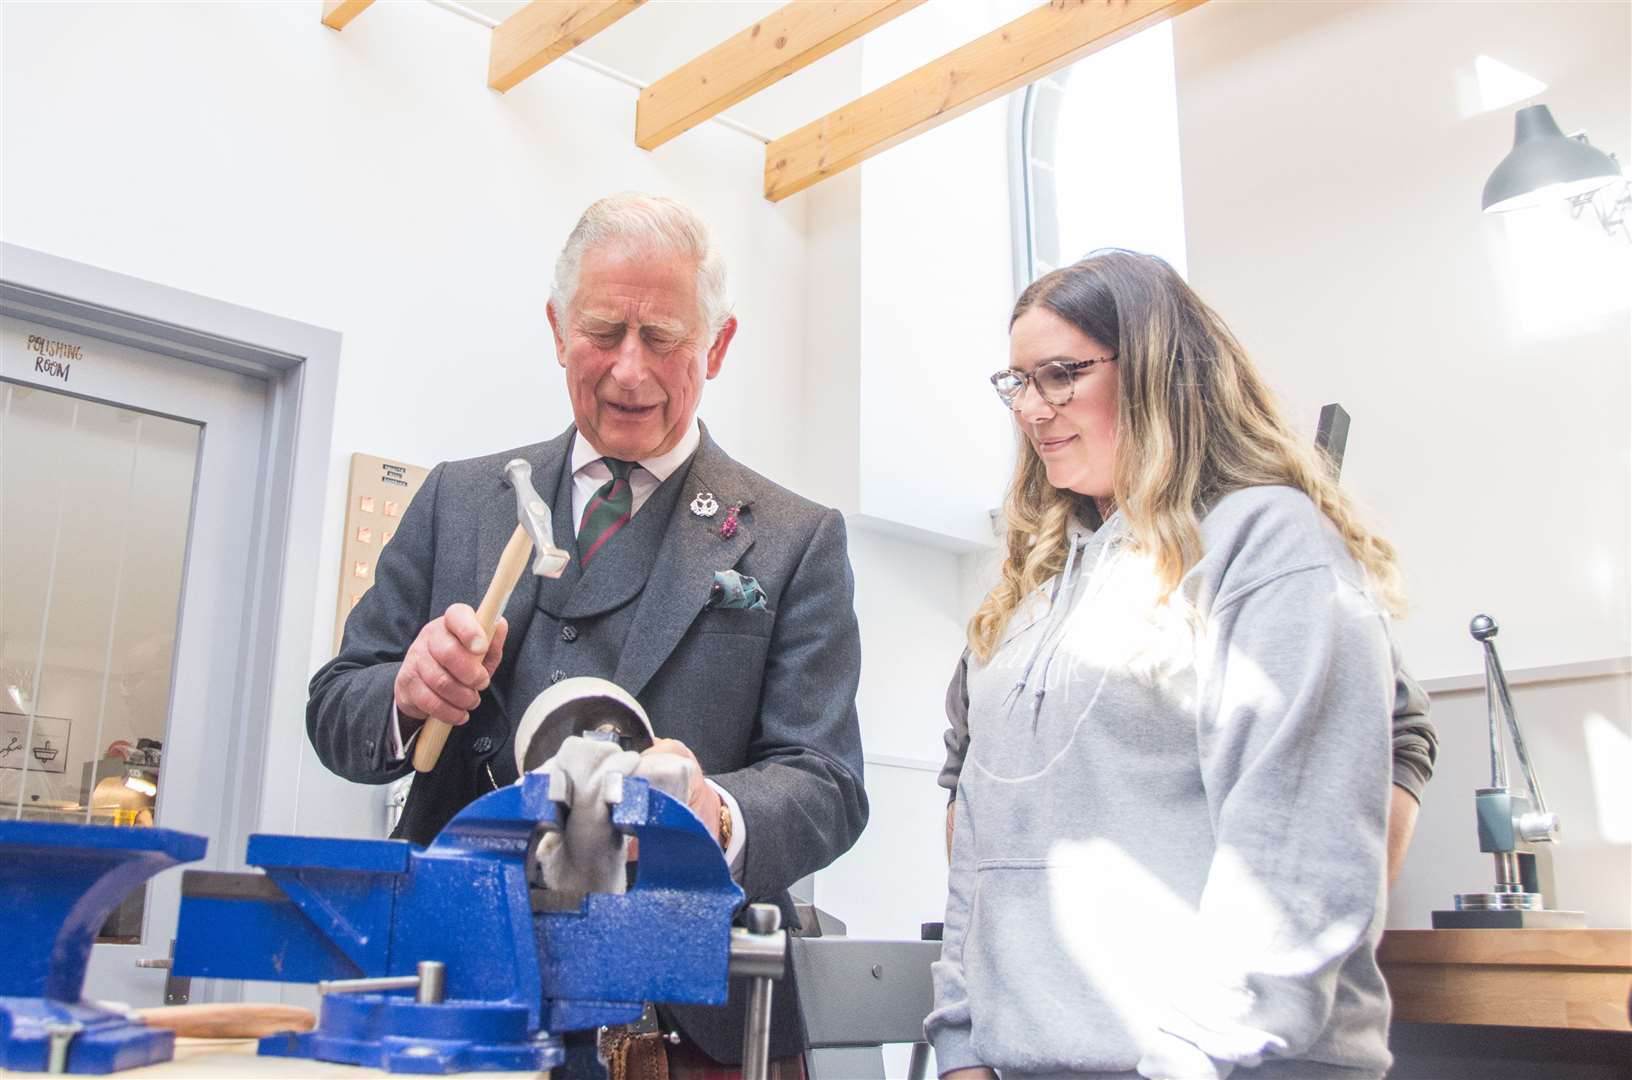 HRH Duke Of Rothesay visited The Smiddy run by Vanilla Ink in Banff and got the chance to try some crafting under the guidance of silversmith Megan Falconer. Picture: Becky Saunderson. Image No.043838.